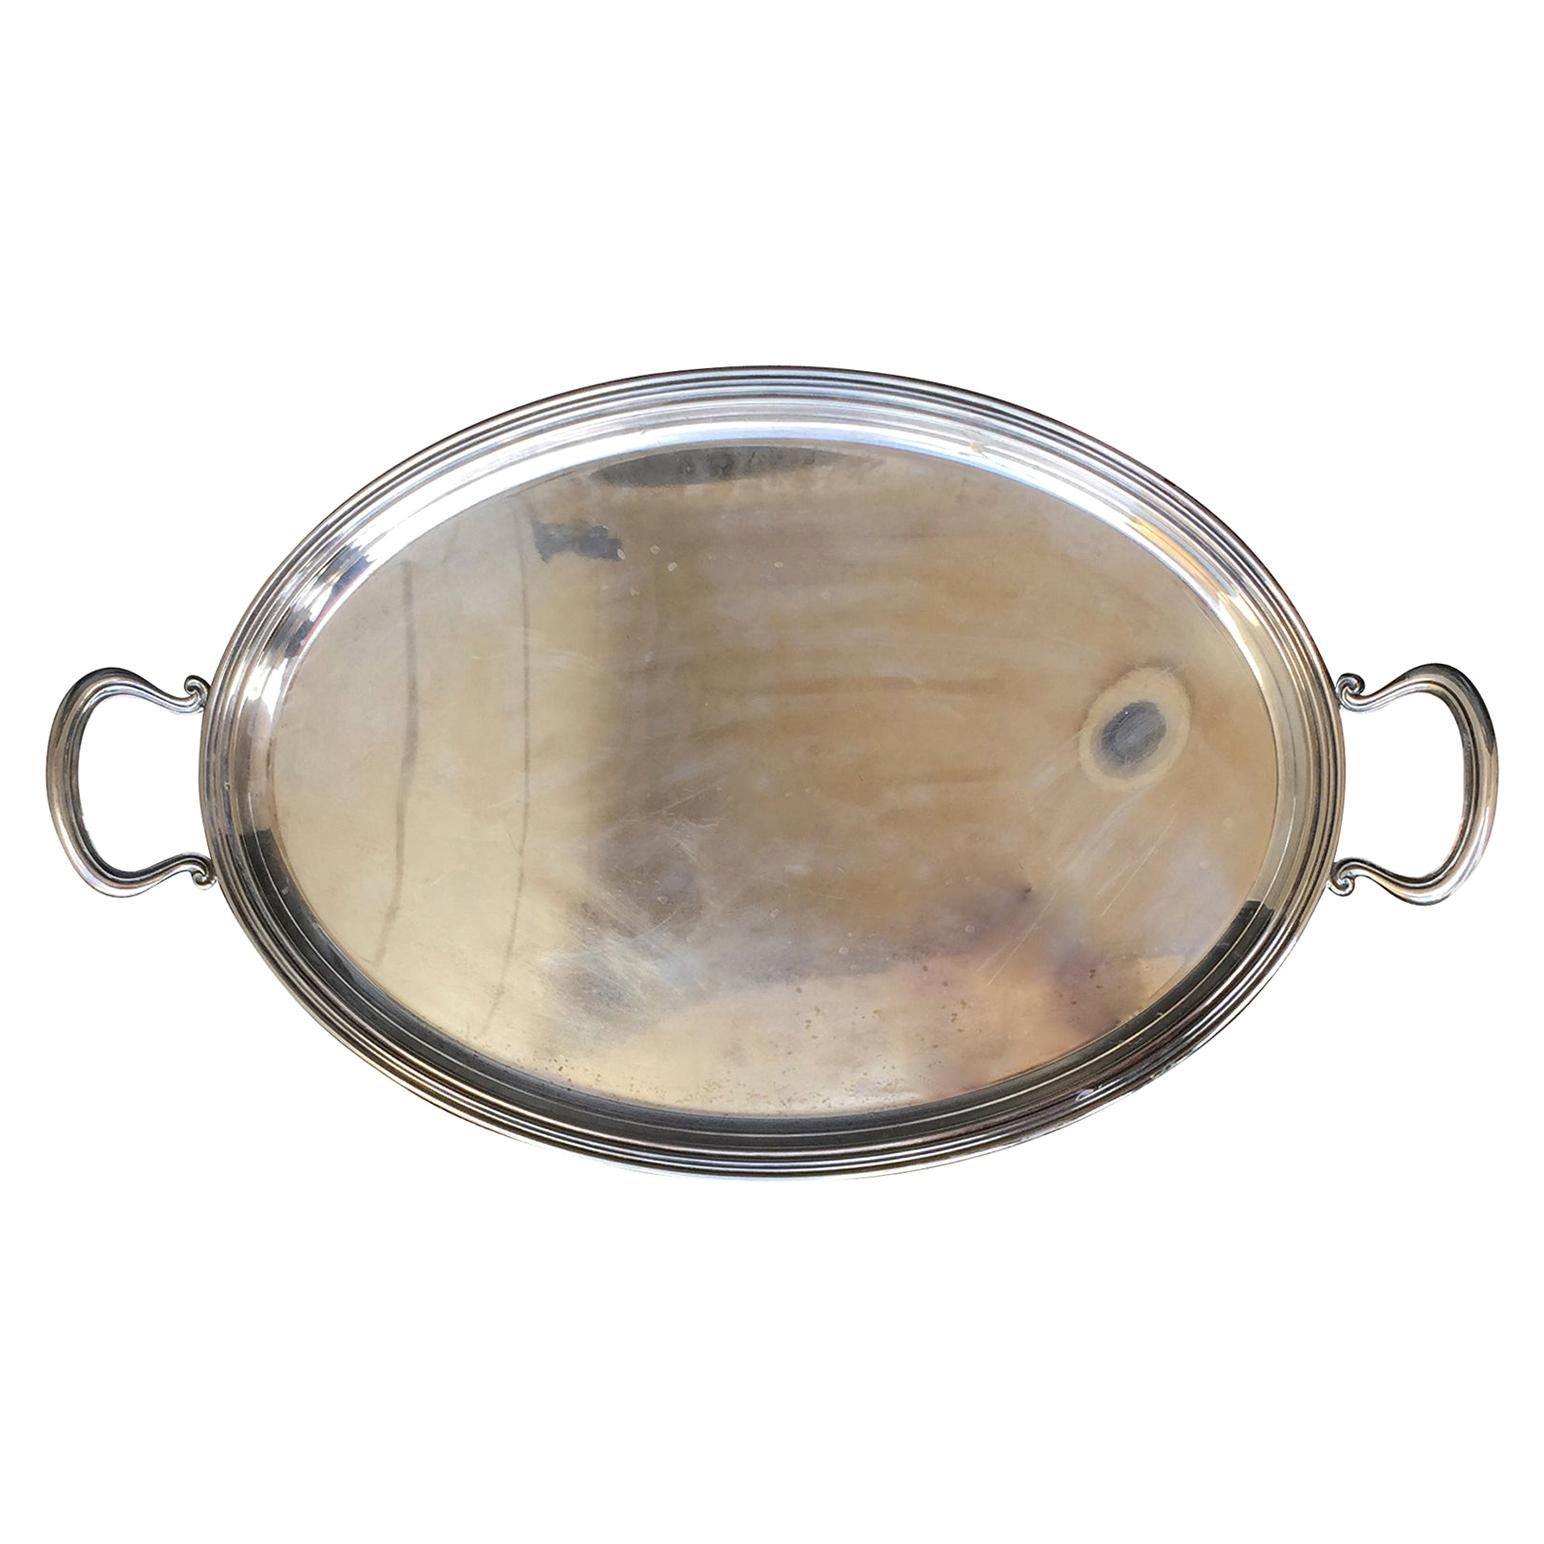 Mid-20th Century Italian Silver Drinks Oval Serving Tray